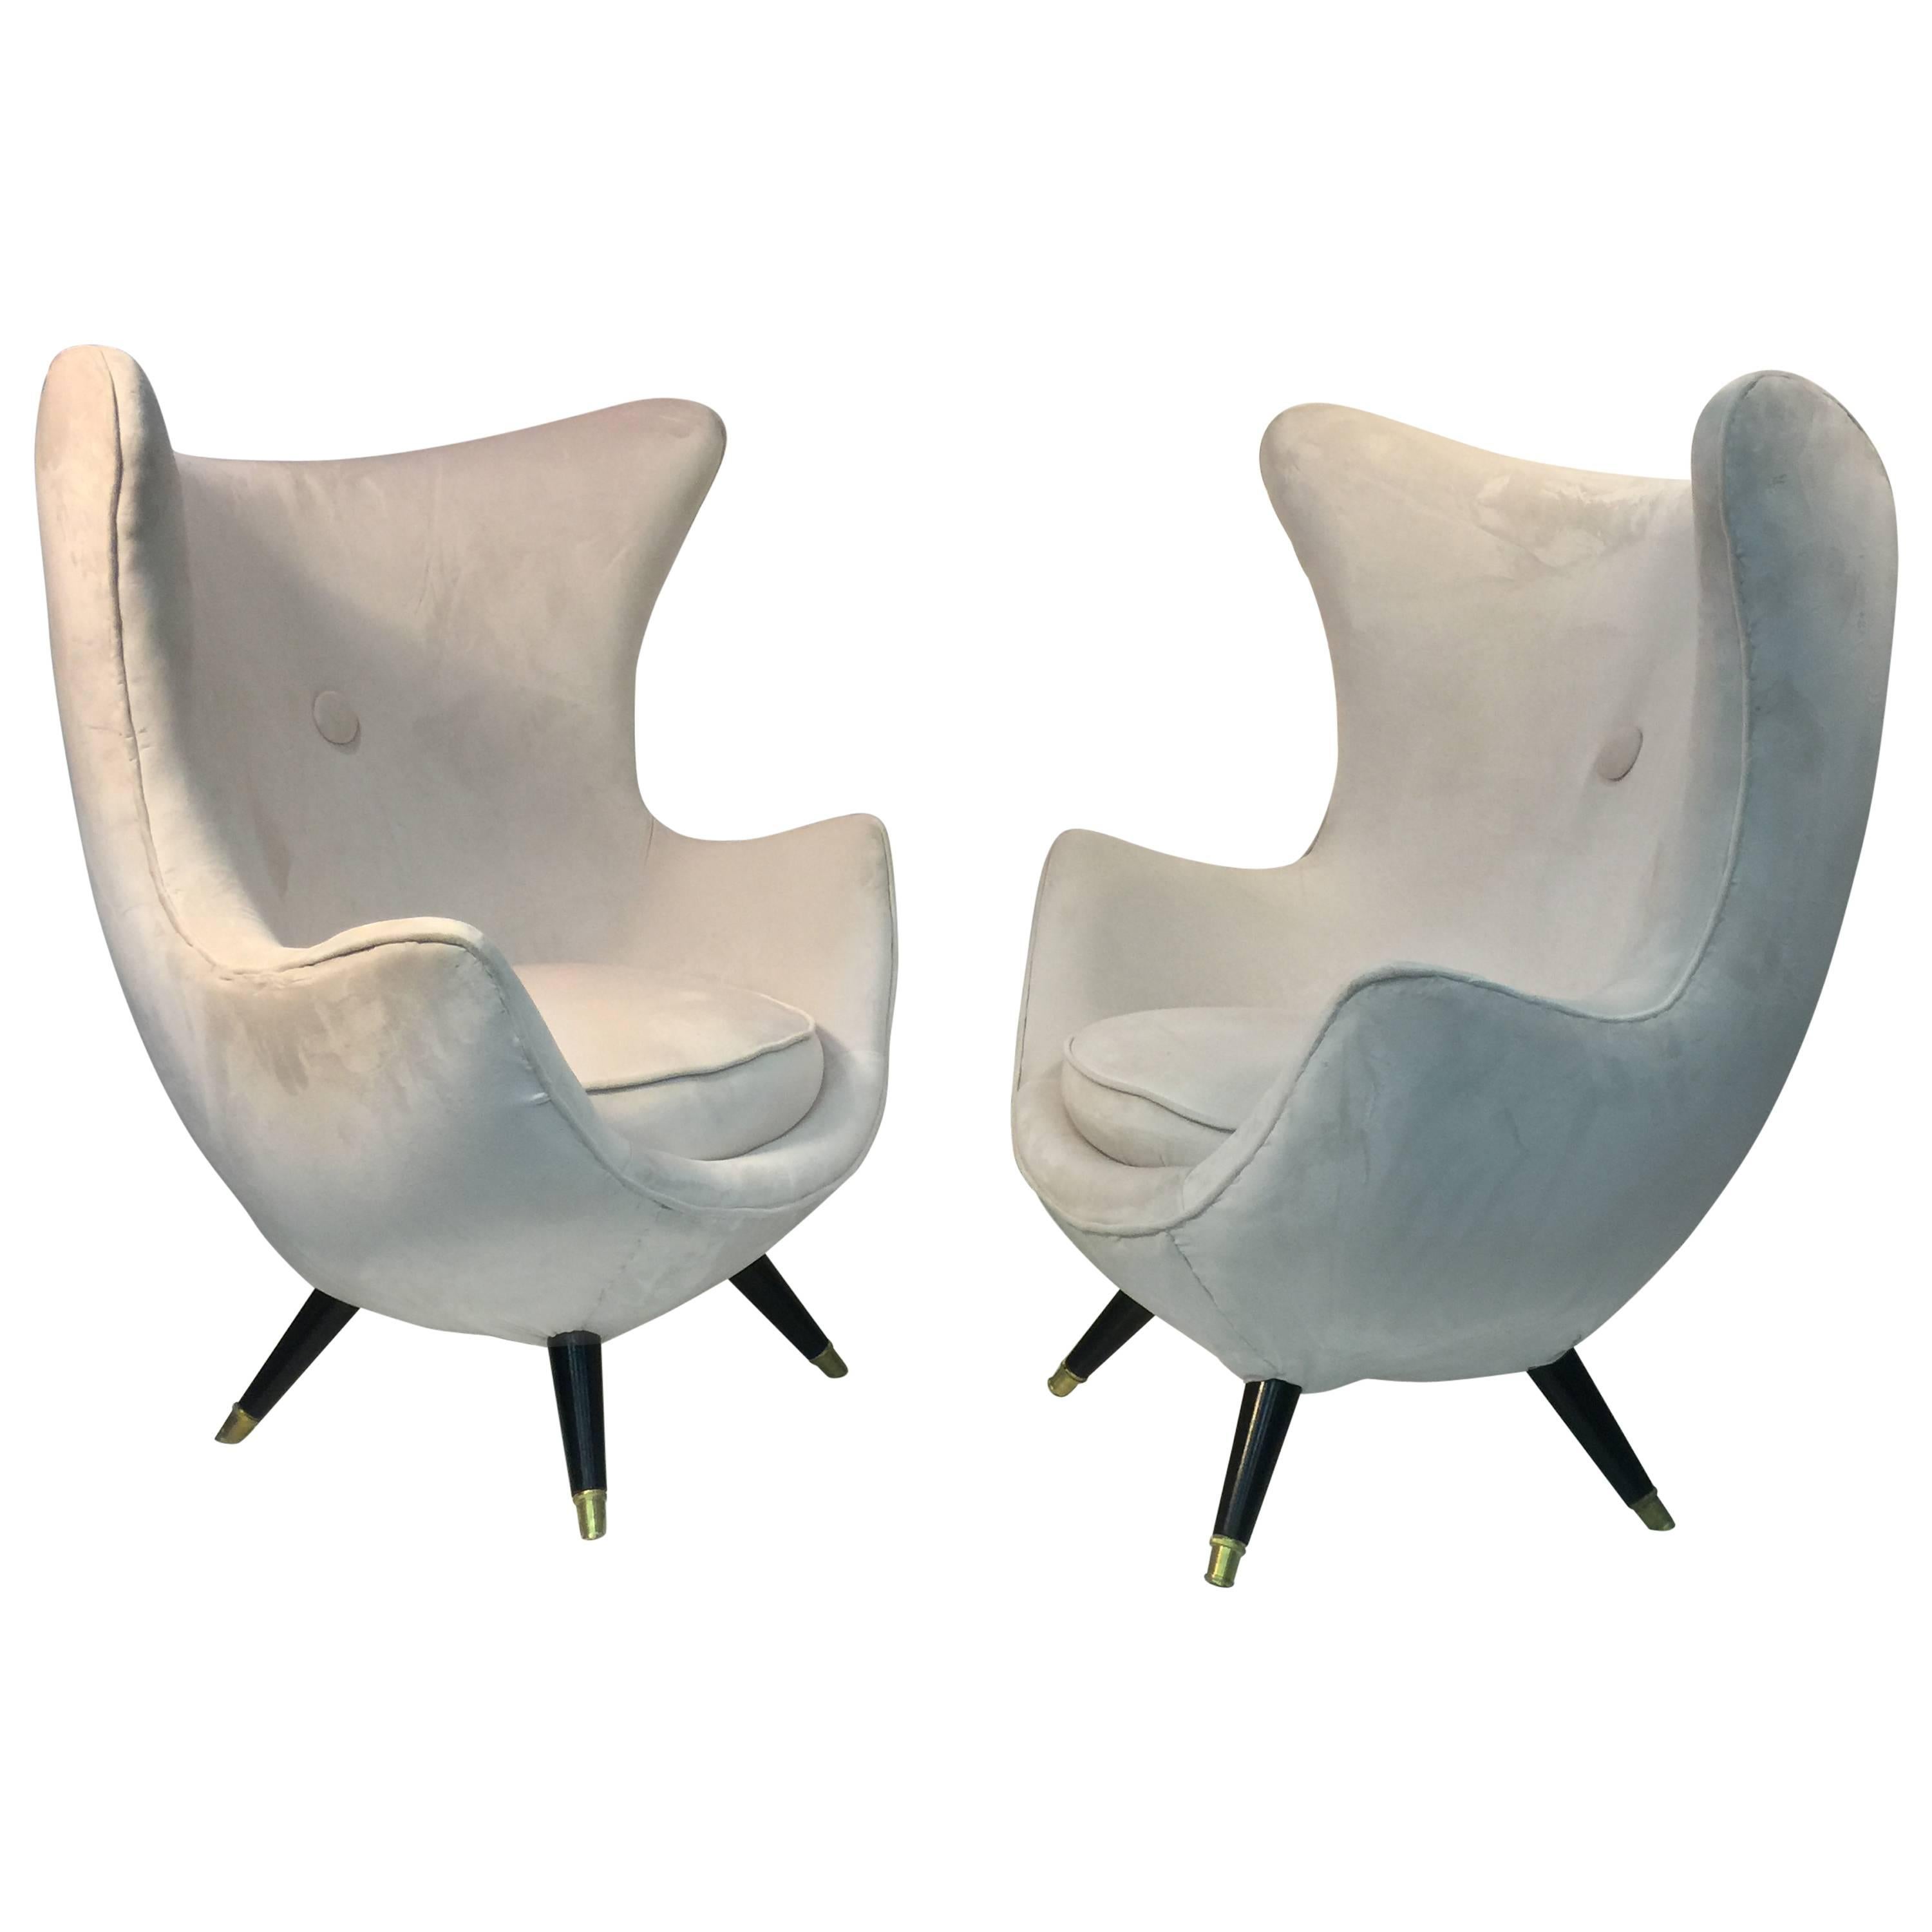 Stunning Pair of Sculptural Lounge Chairs in the Manner of Carlo Mollino For Sale